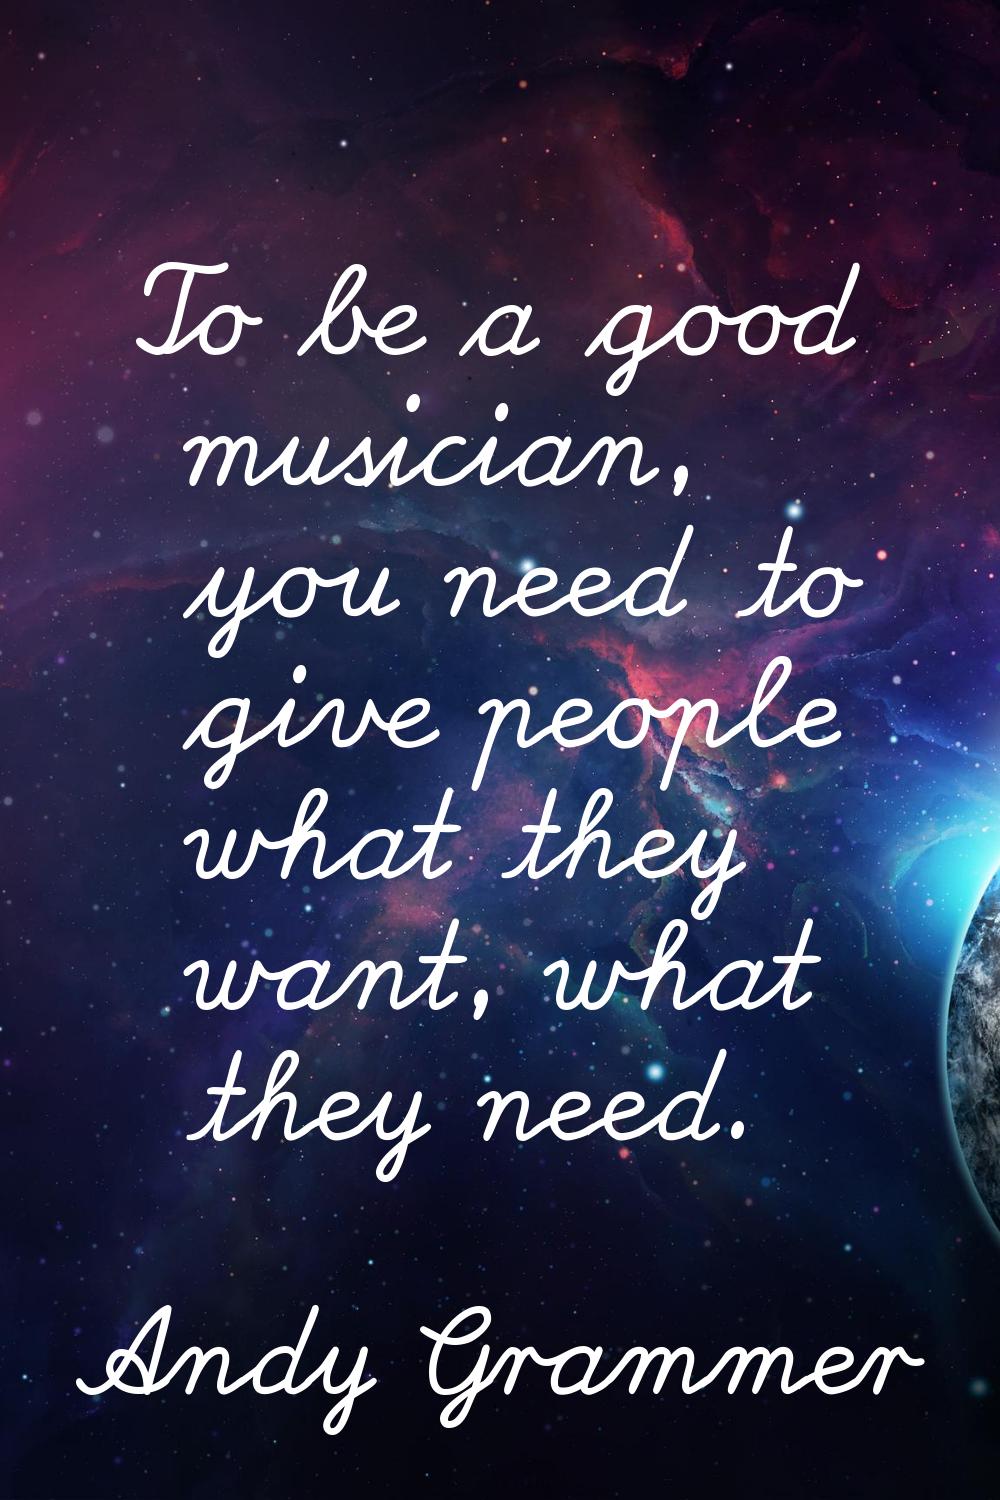 To be a good musician, you need to give people what they want, what they need.